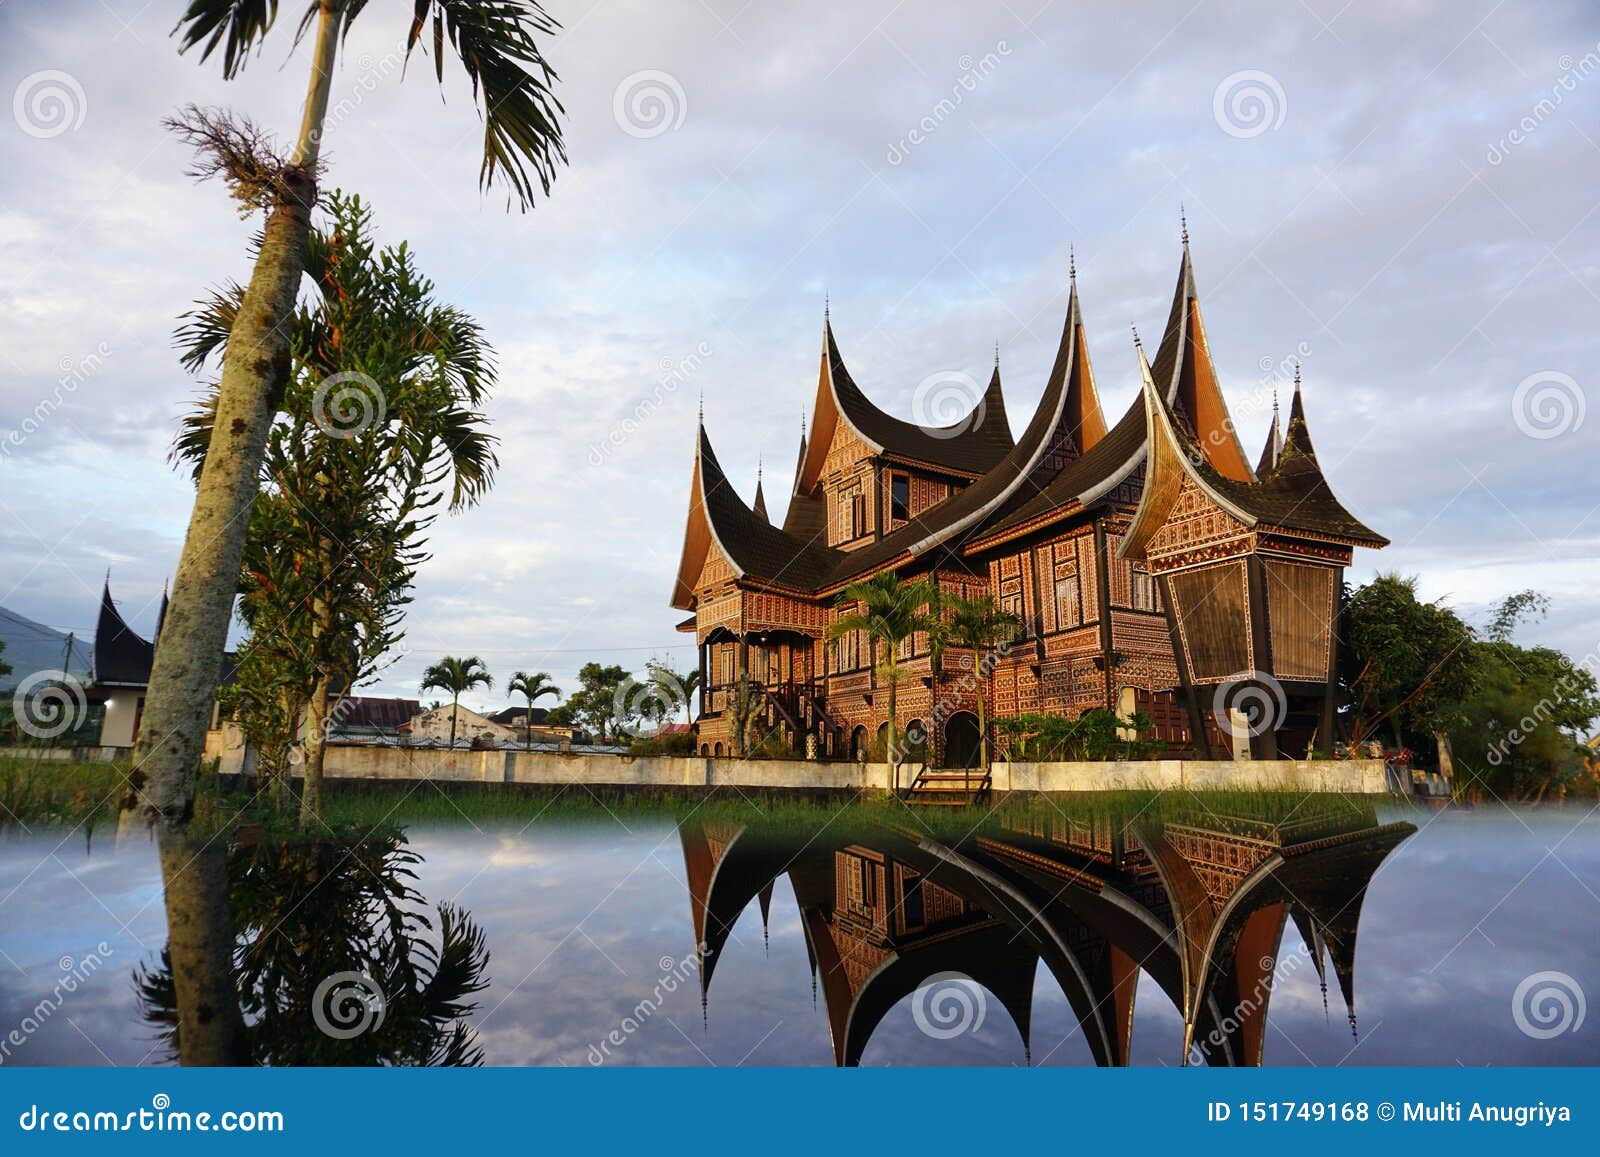 Traditional House From West Sumatera  Indonesia Stock Photo 